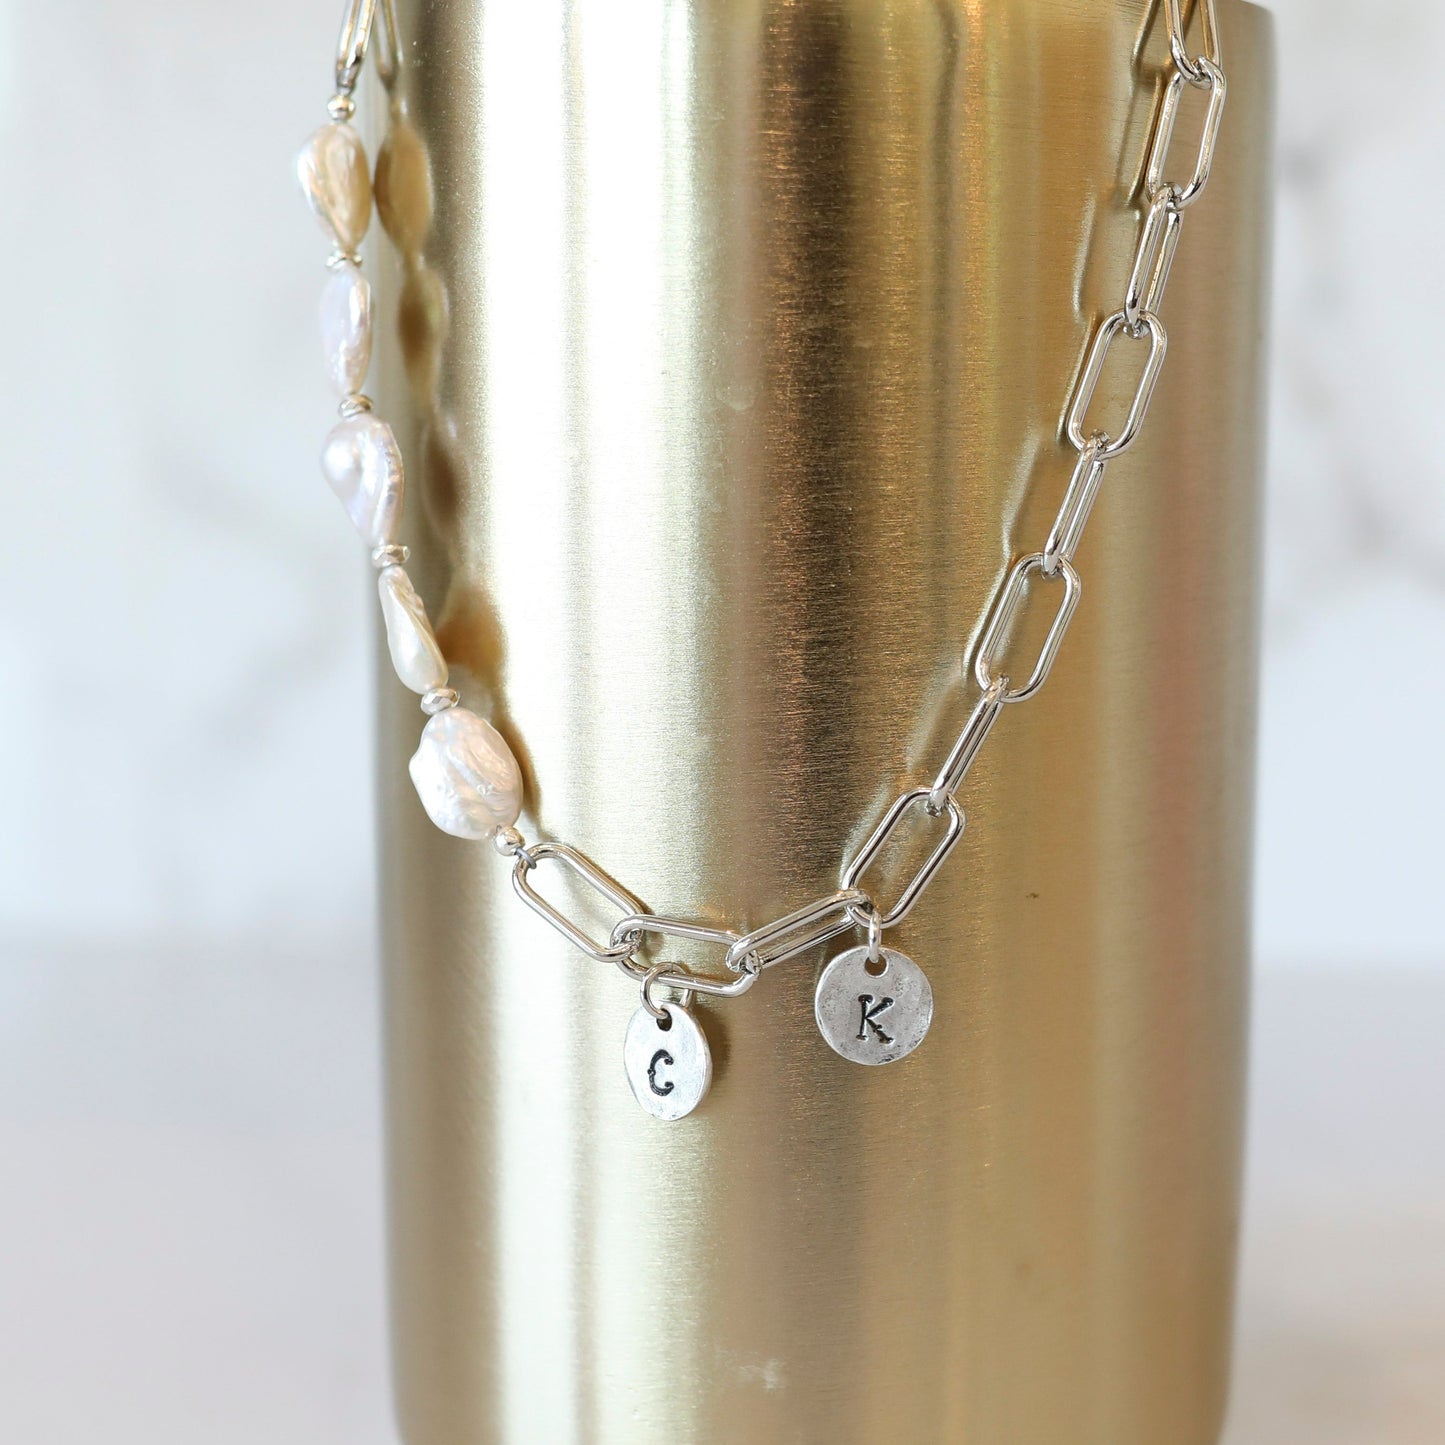 Personalized Asymmetrical Pearl Charm Necklace in Silver